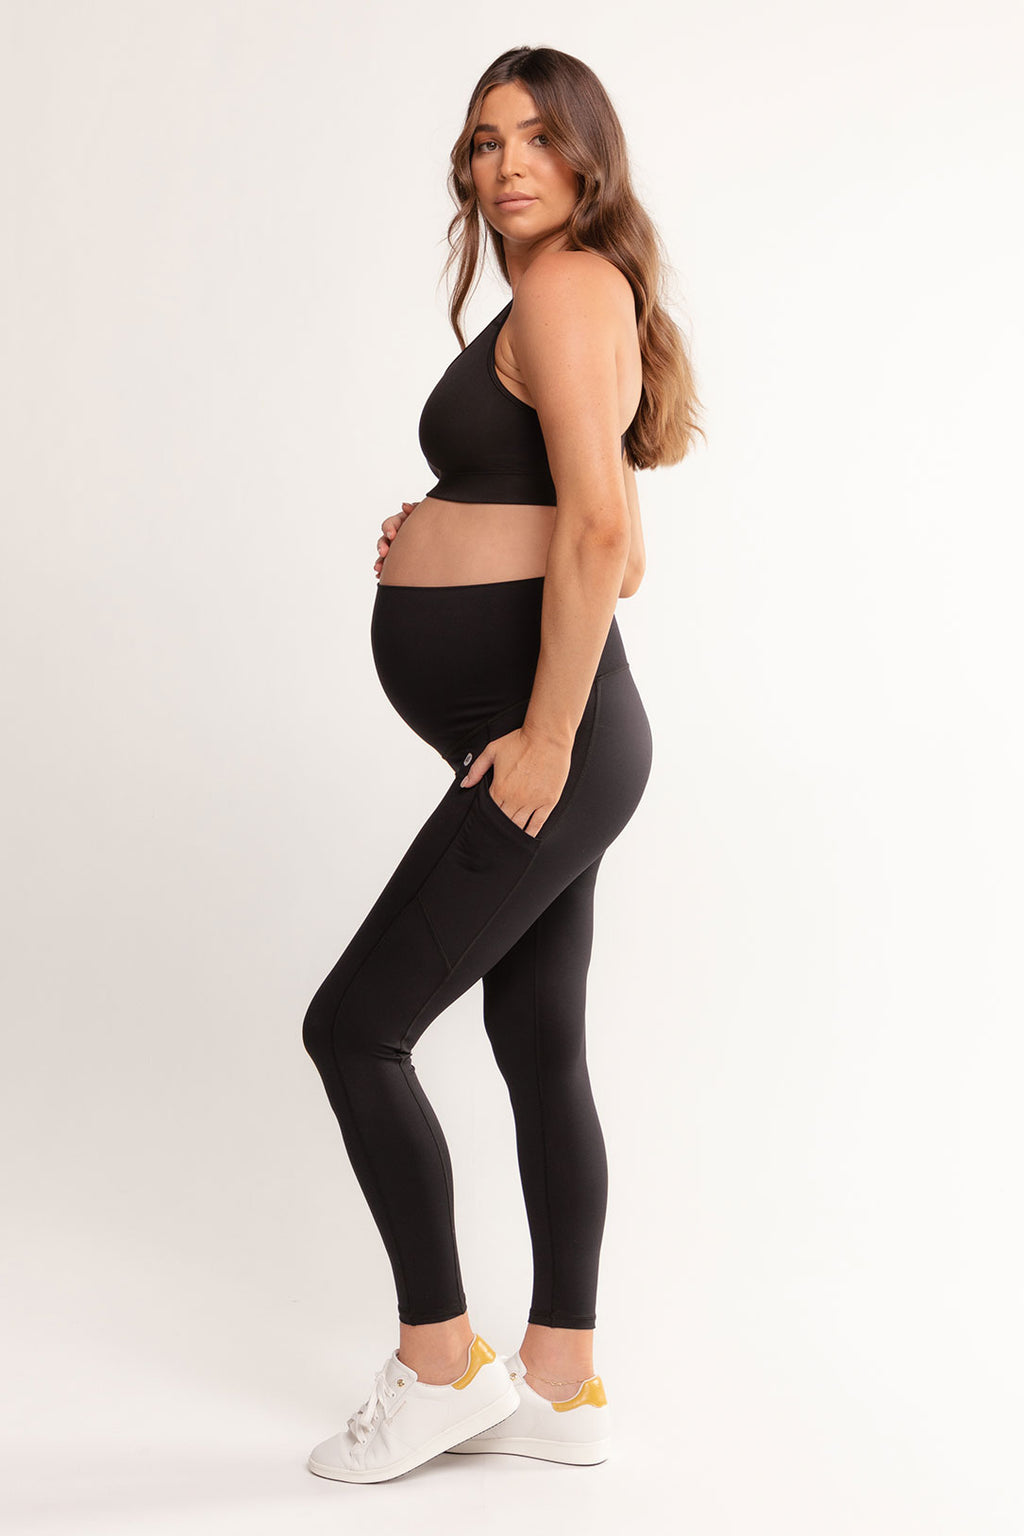 maternity-exercise-pocket-tights-small-side
